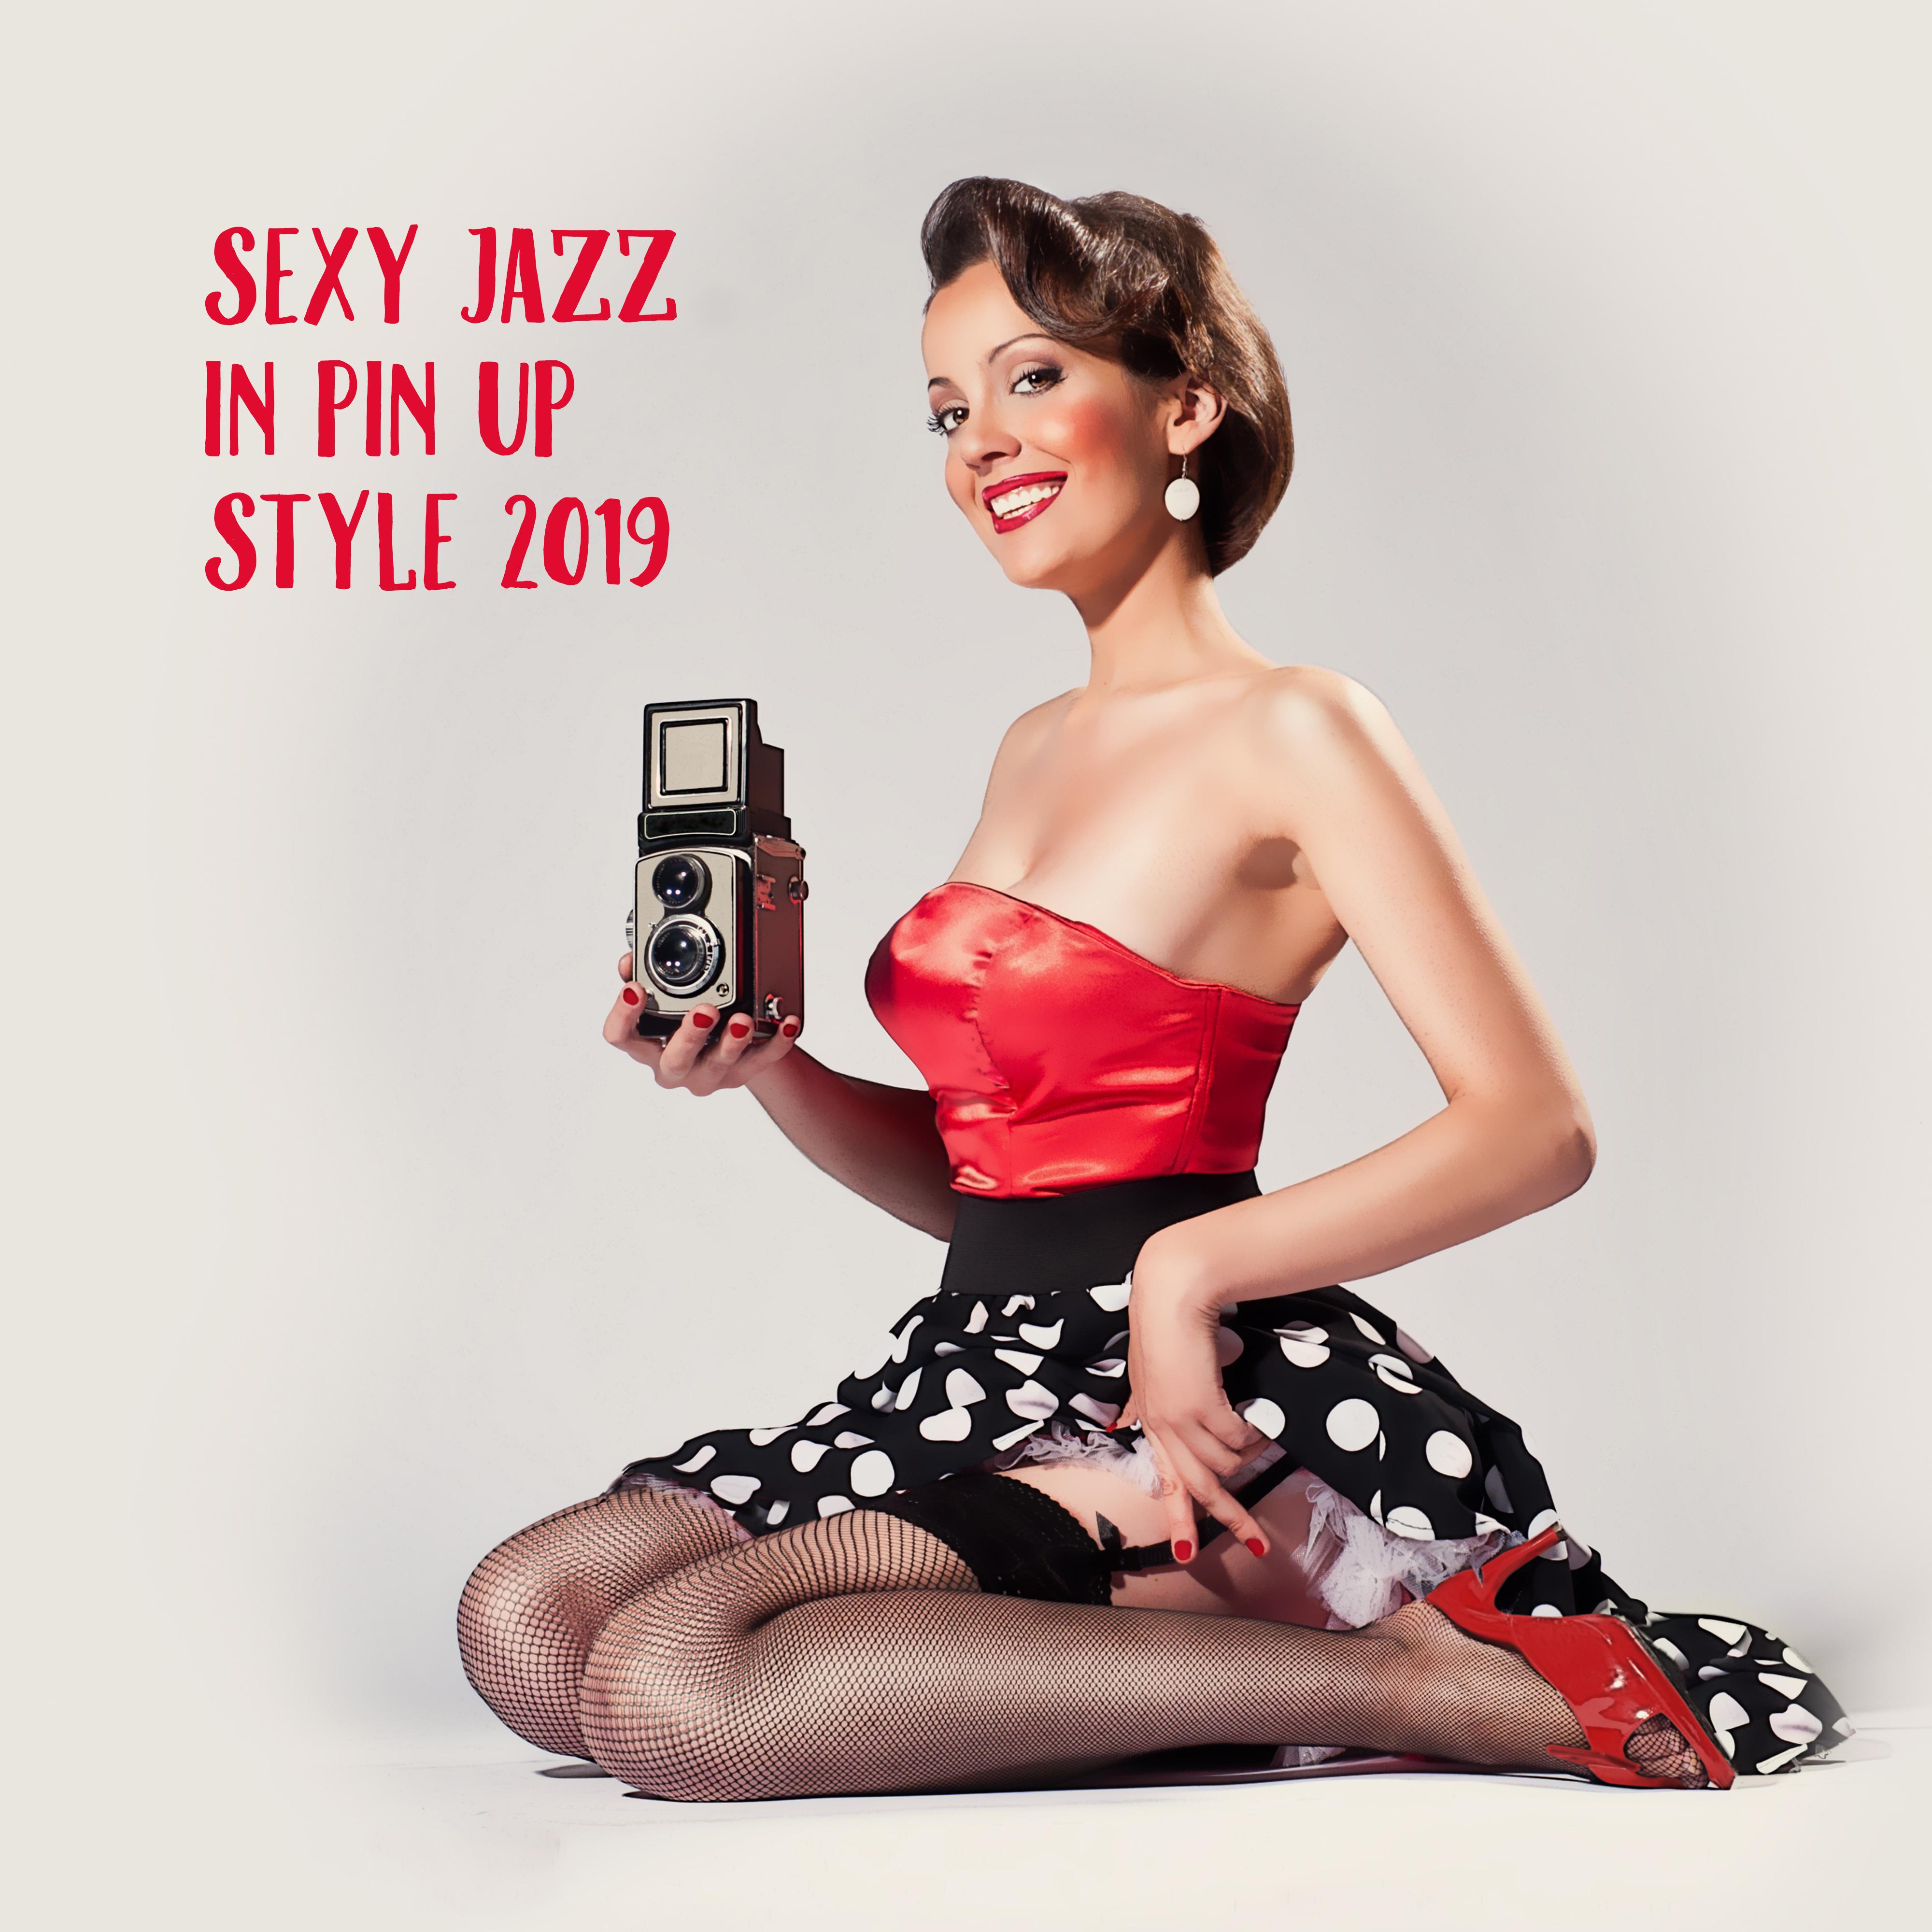 Sexy Jazz in Pin Up Style 2019